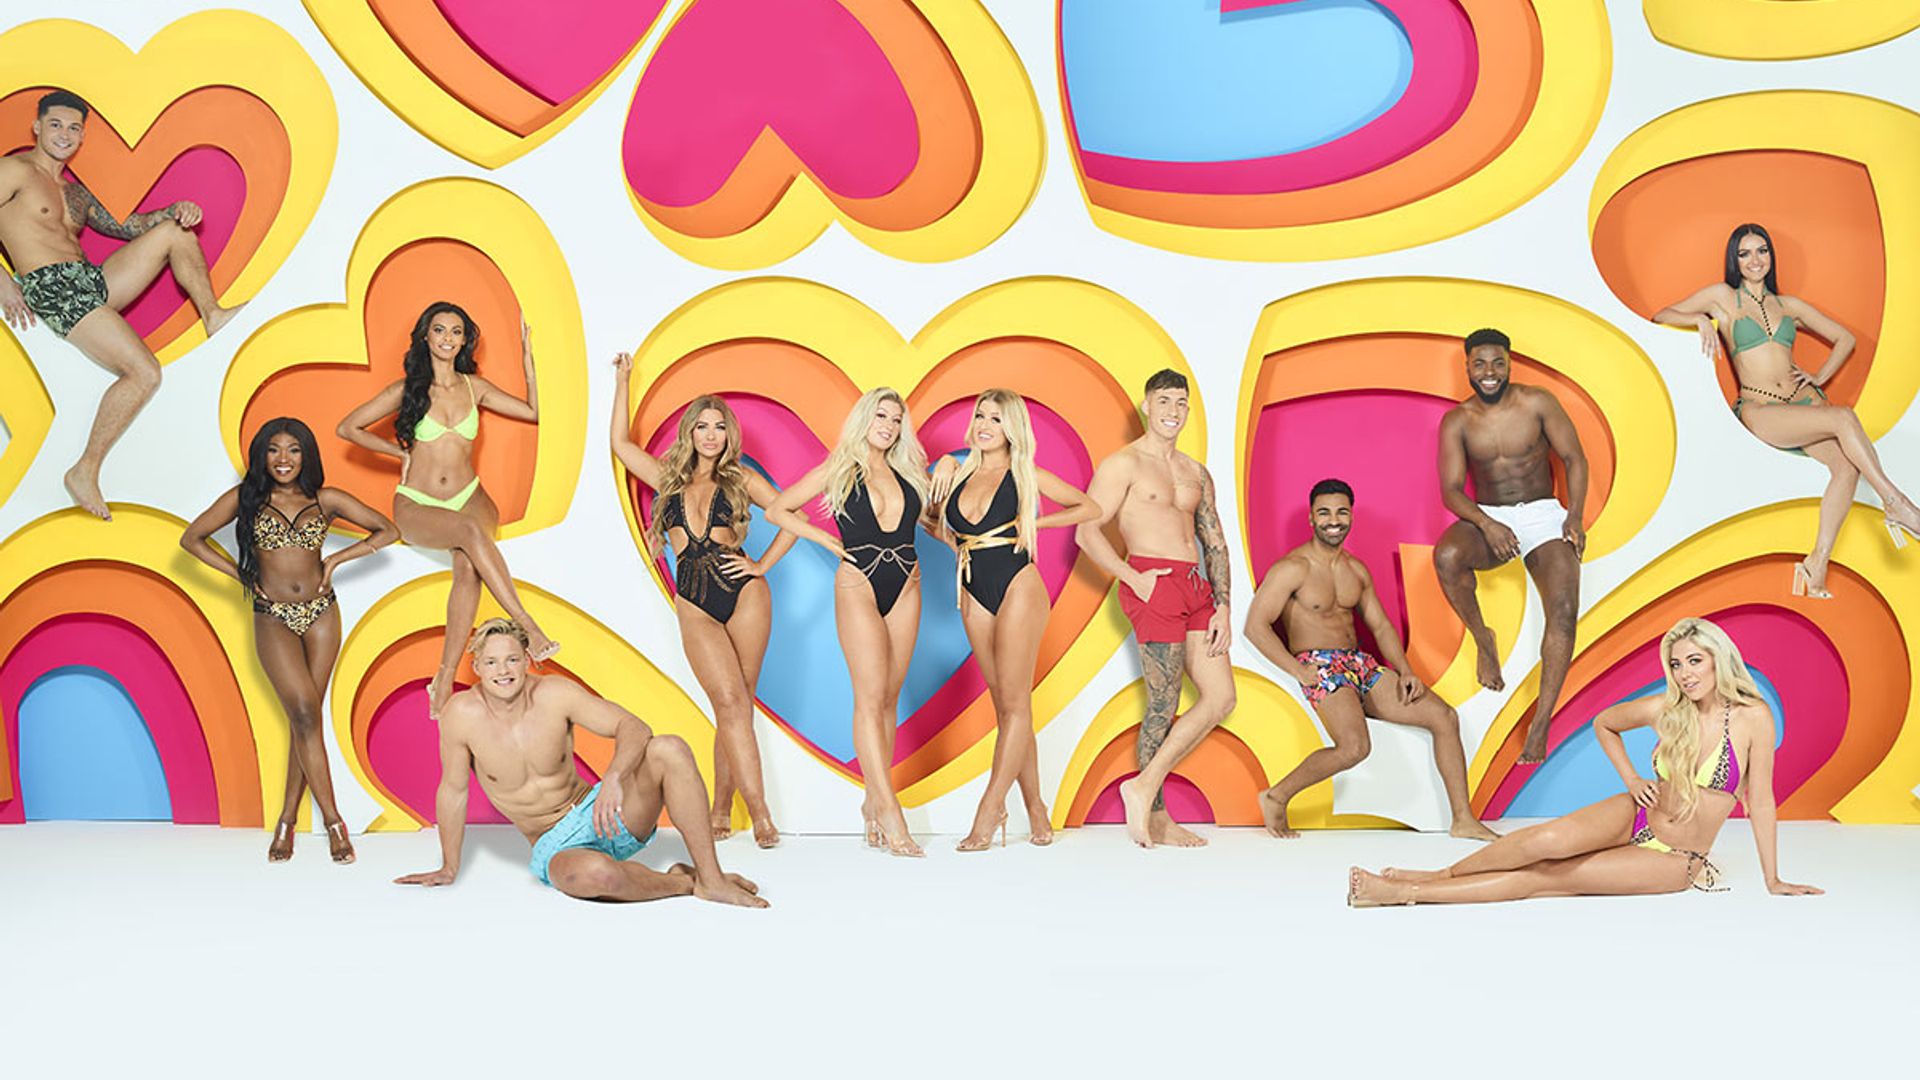 OPINION: "Yet again, Love Island fail us with diverse body shapes"